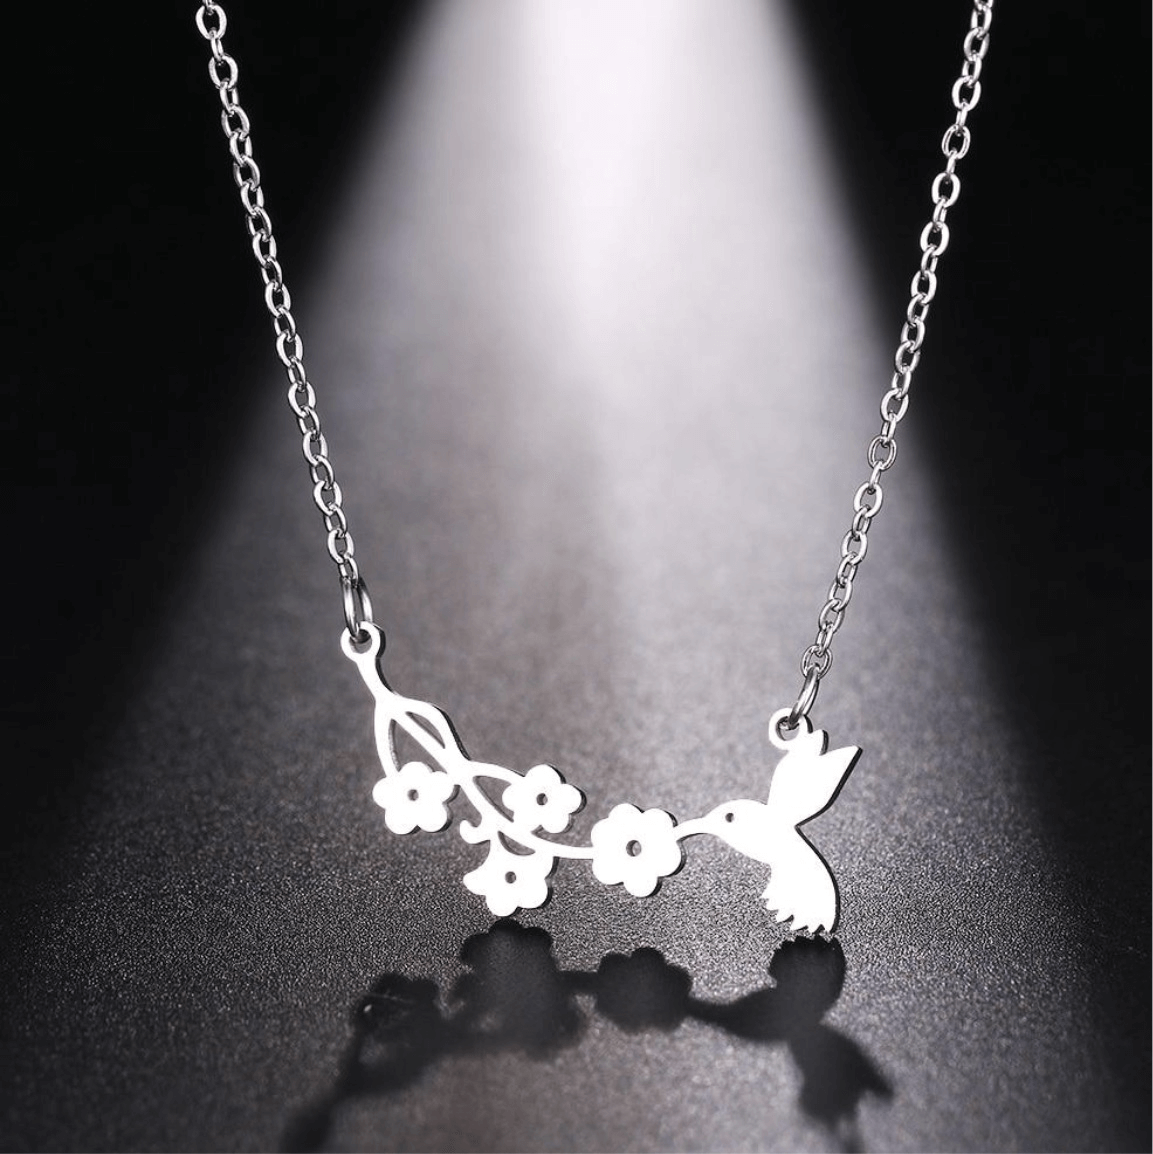 Charm pendent flying bird Necklace stainless steel non fade Jewelry gift